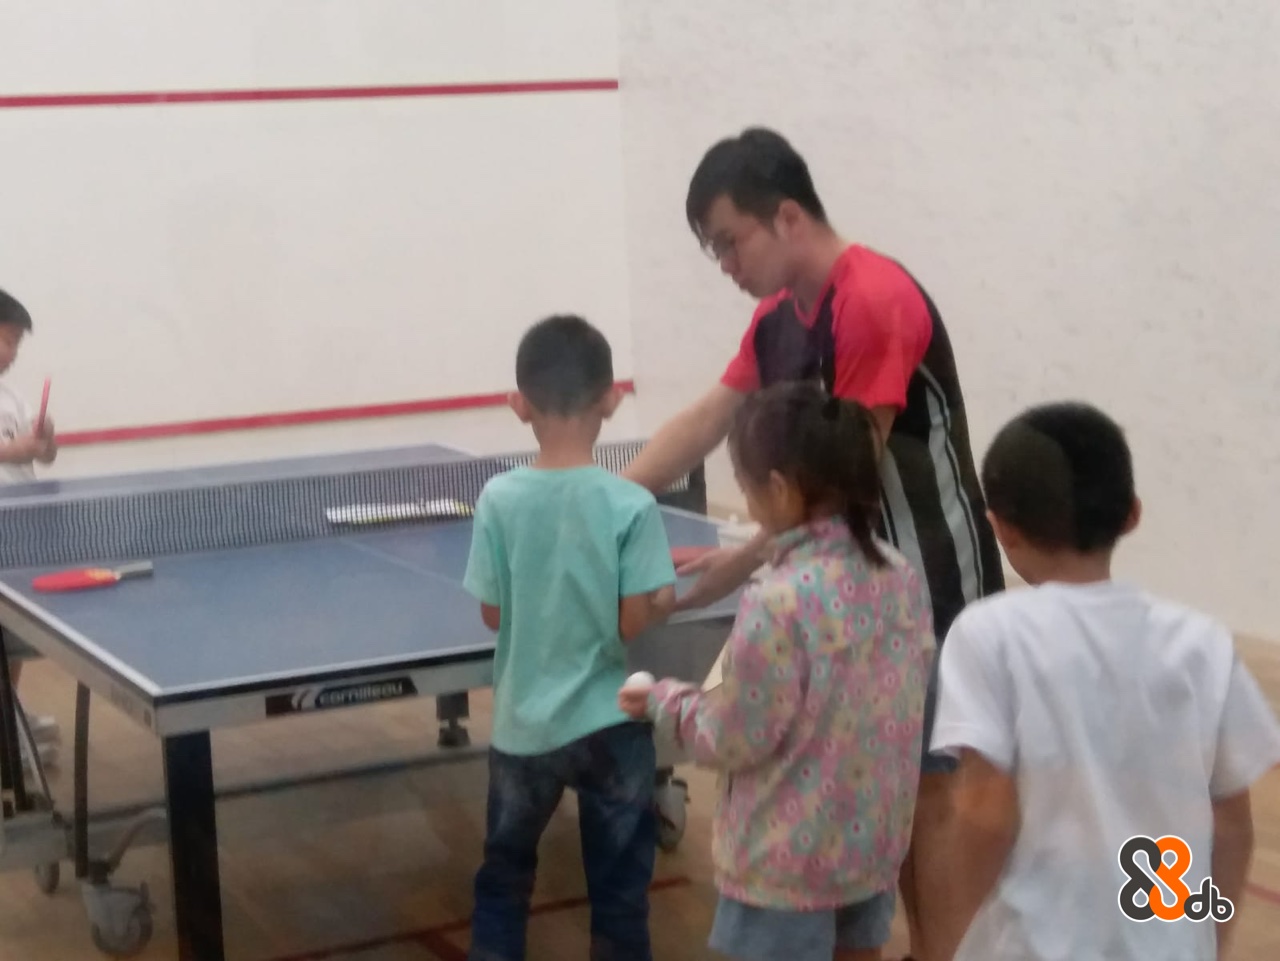  Ping pong,Racquet sport,Room,Indoor games and sports,Fun